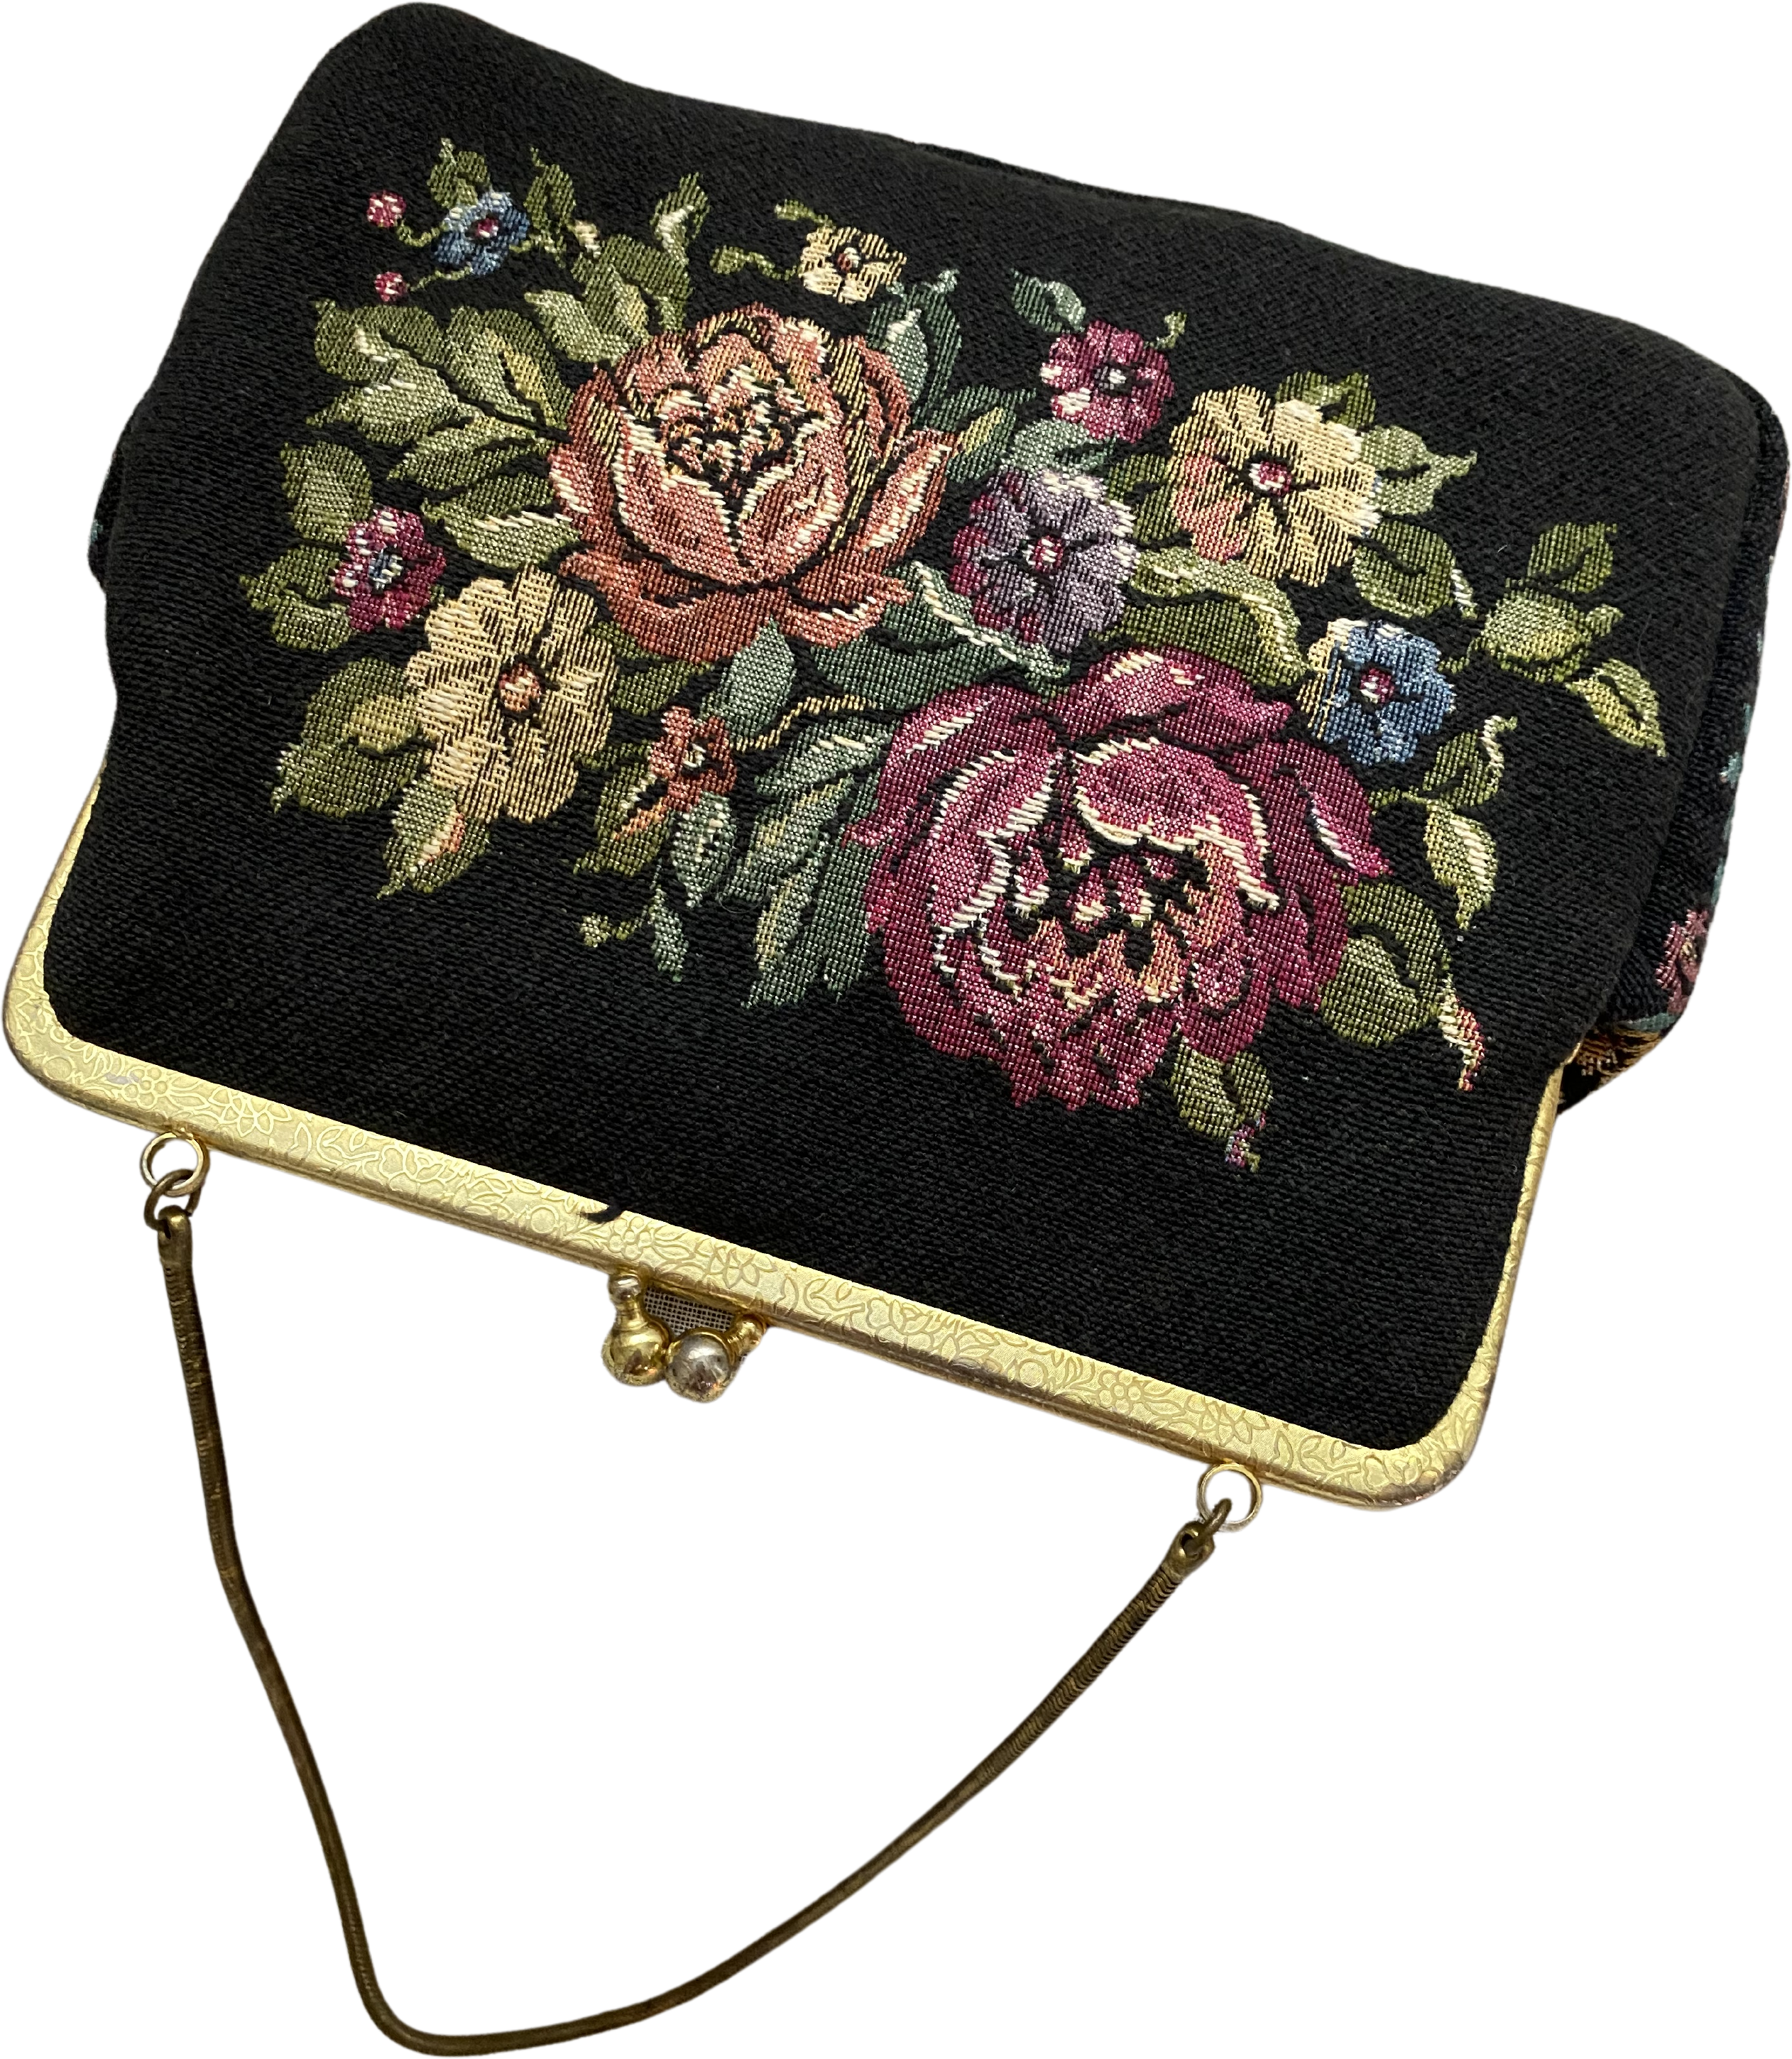 Vintage 1950's Tapestry Floral Evening Bag from West Germany